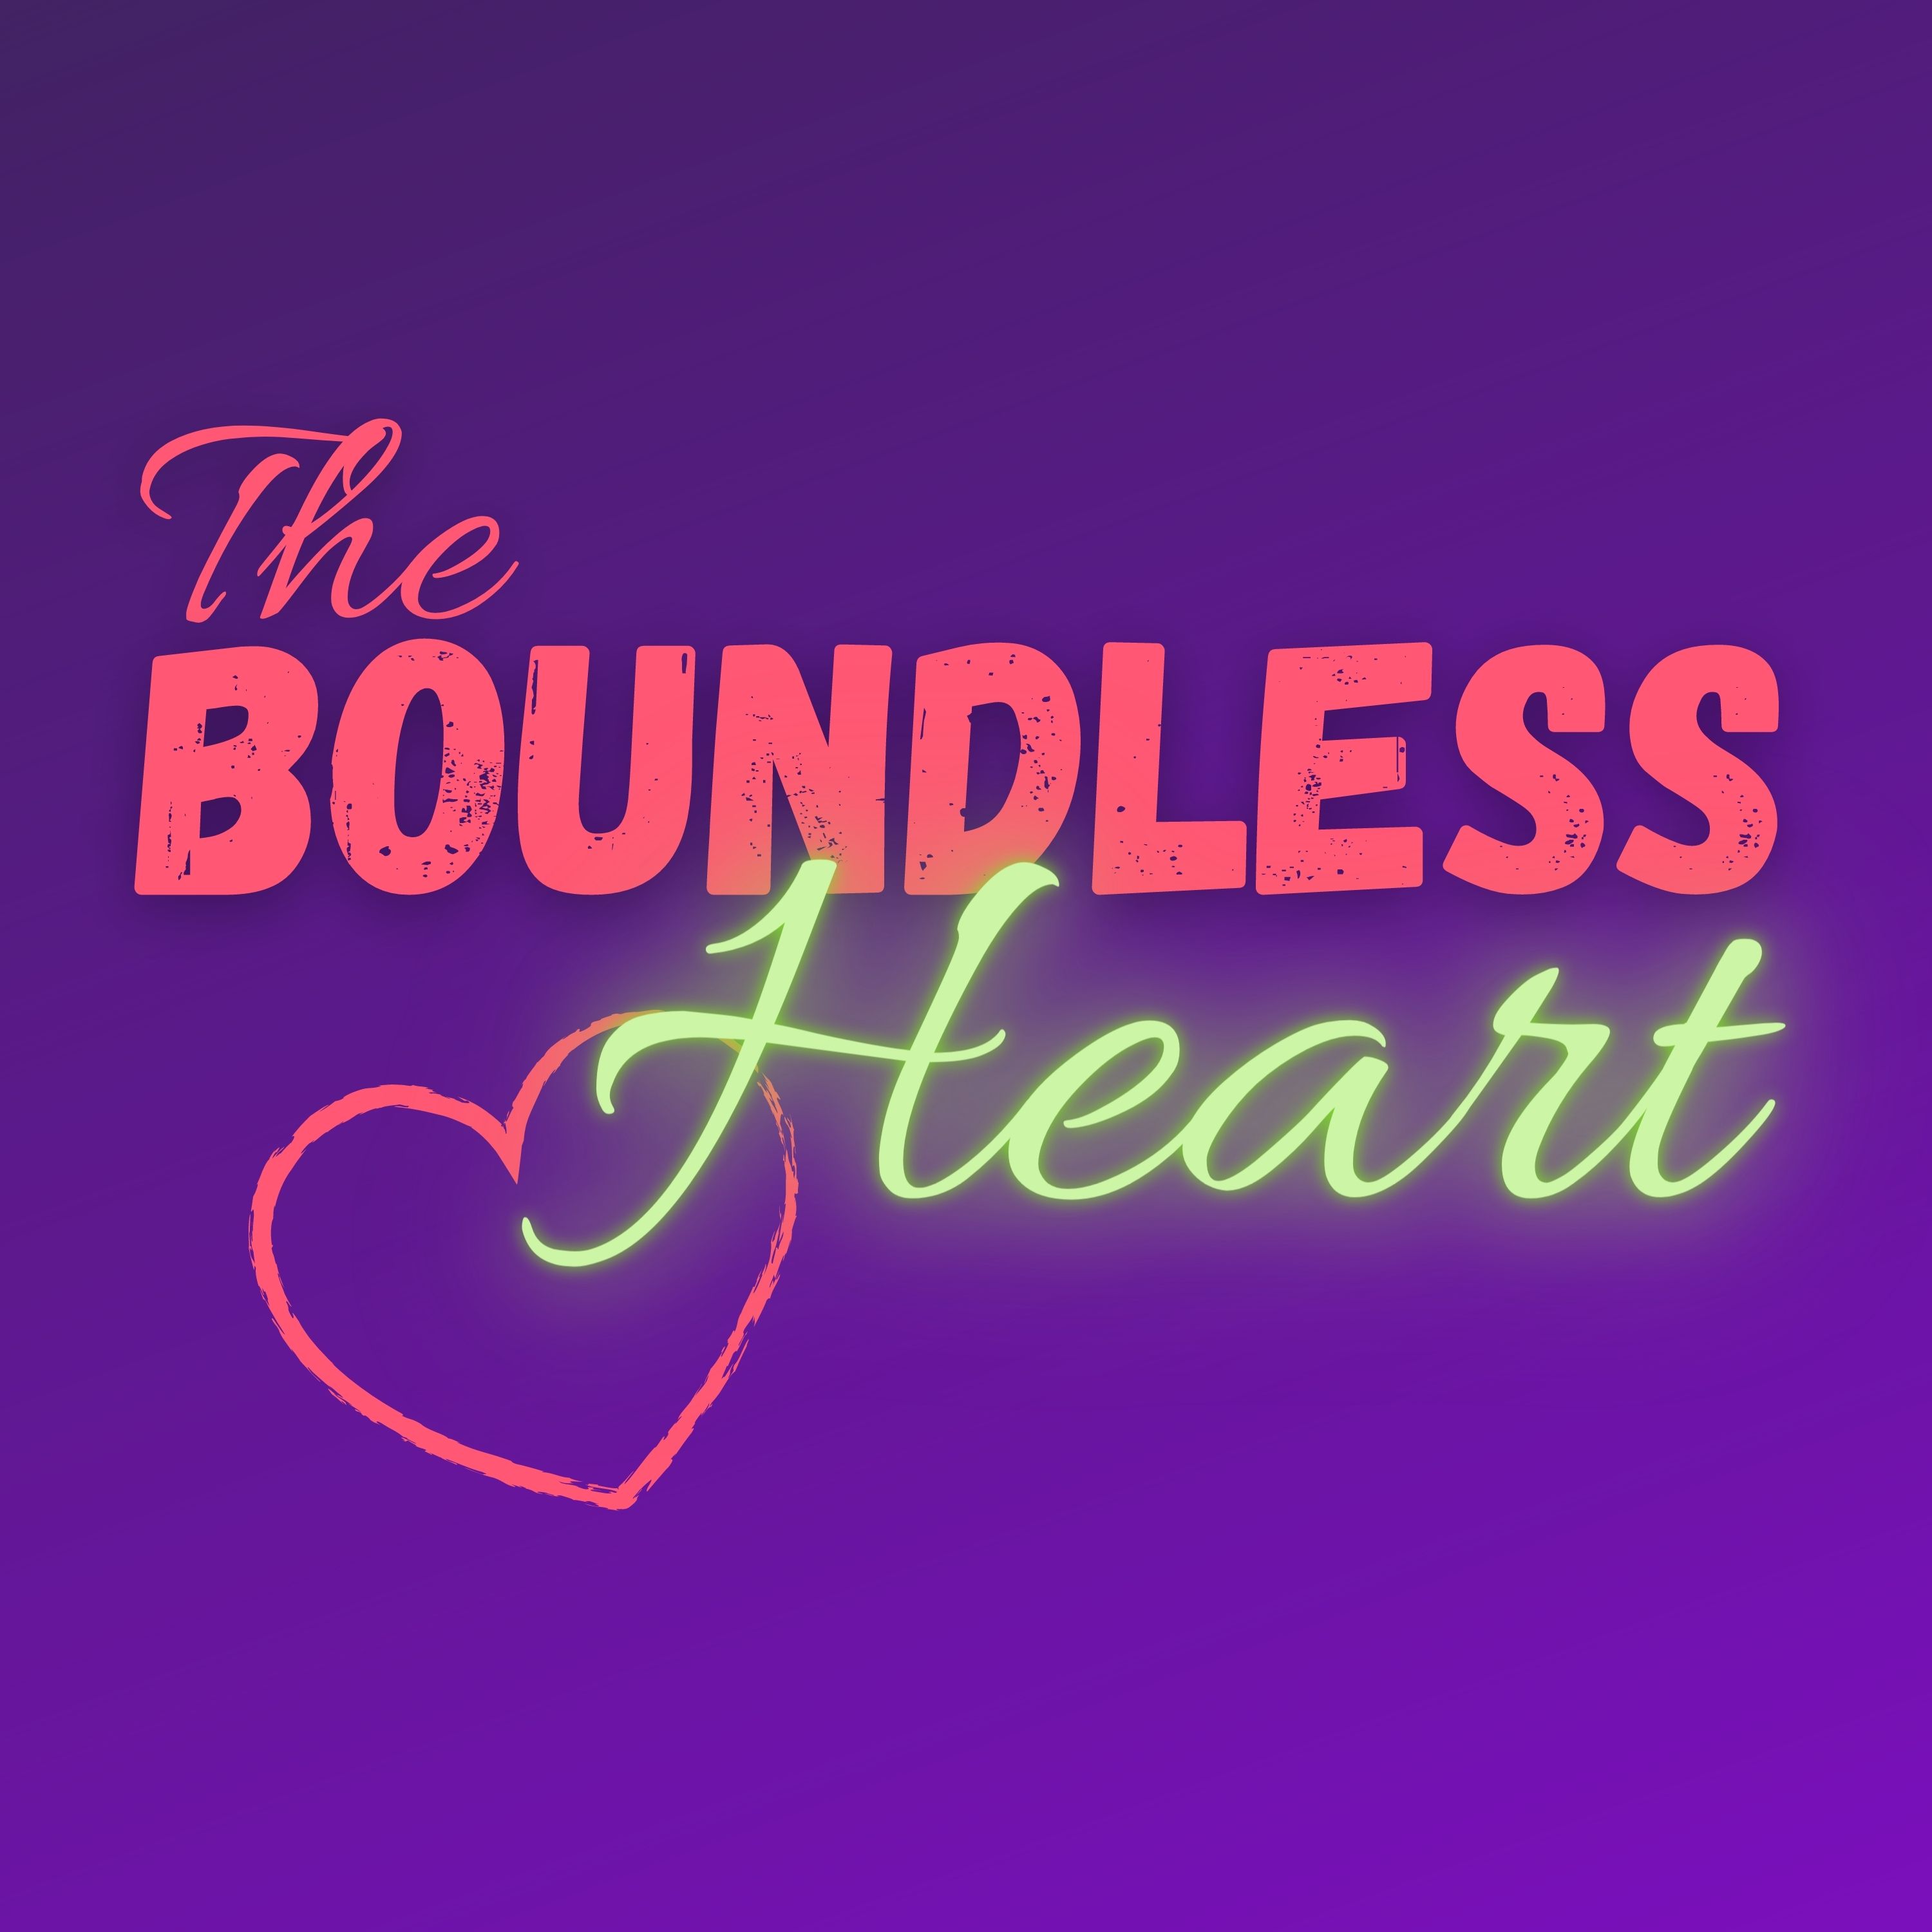 My Deepest Why for The Boundless Heart Image